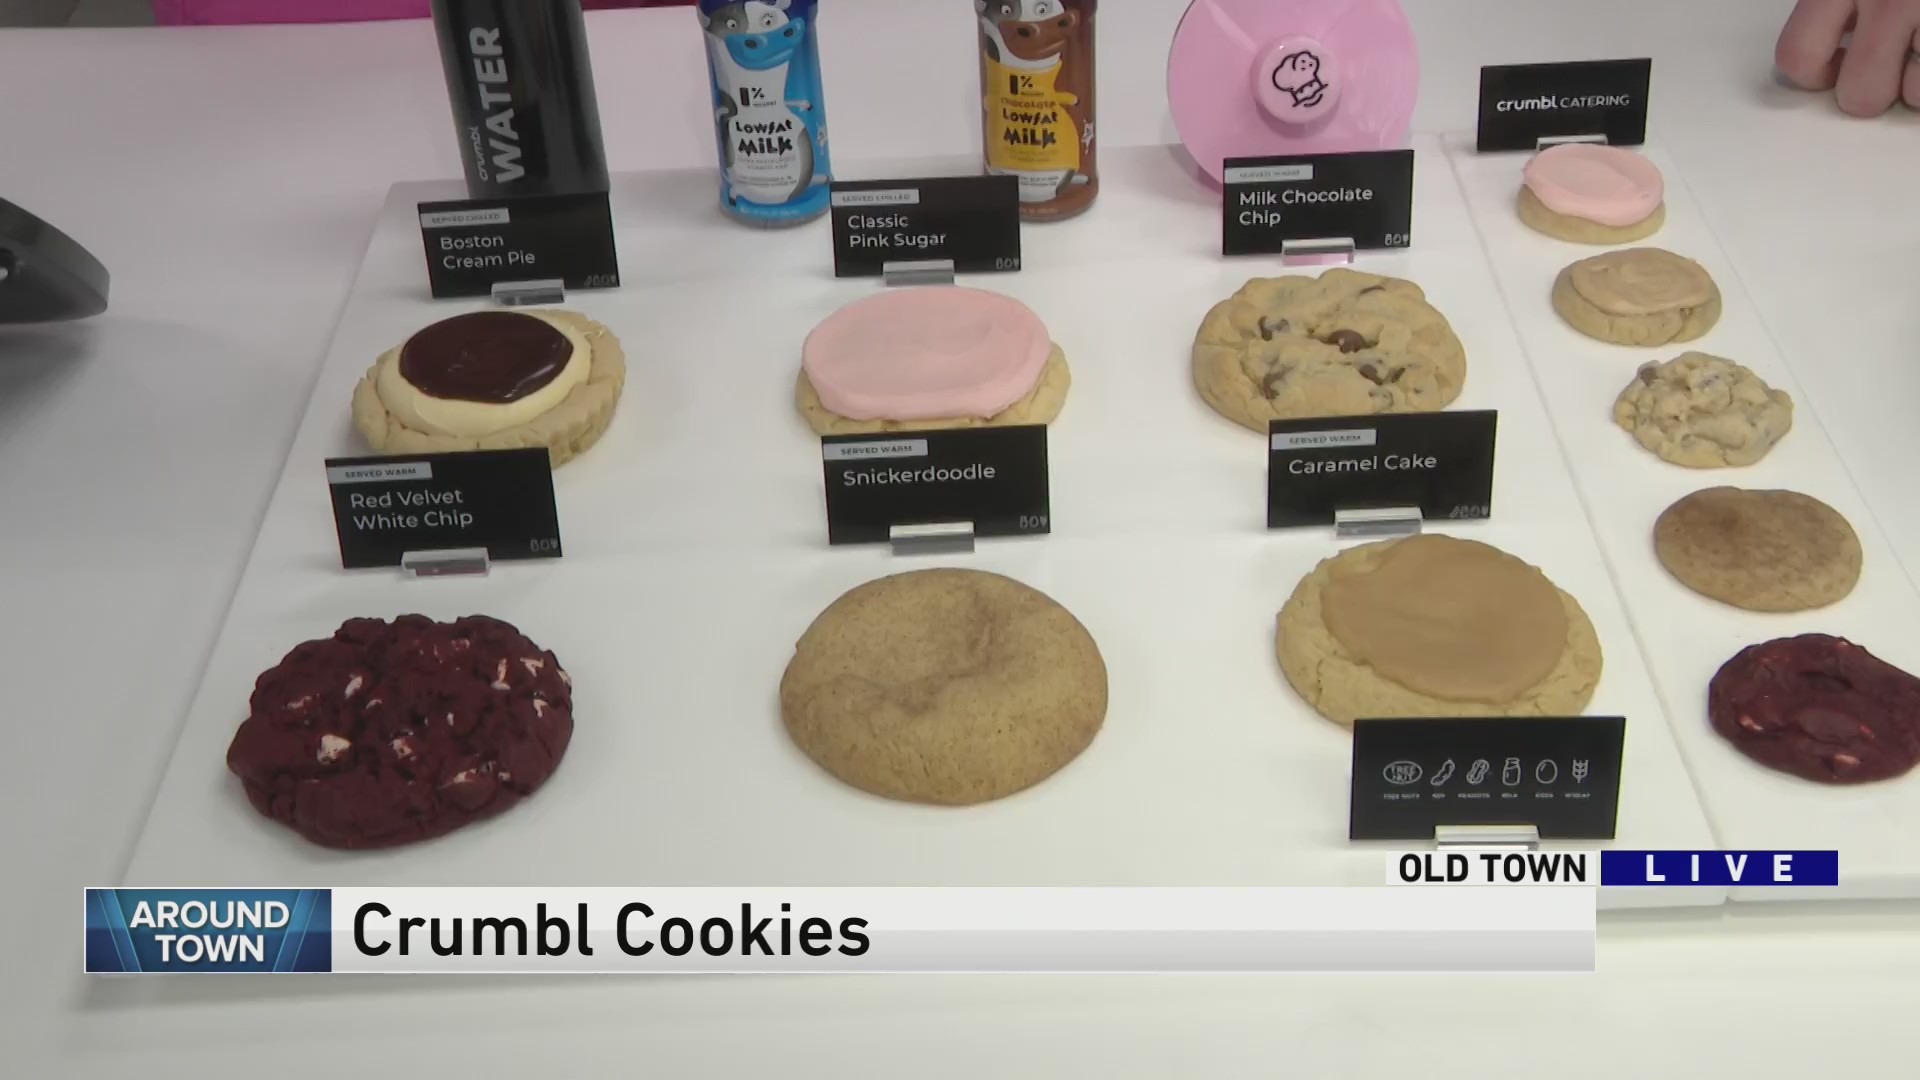 Around Town checks out Crumbl Cookies